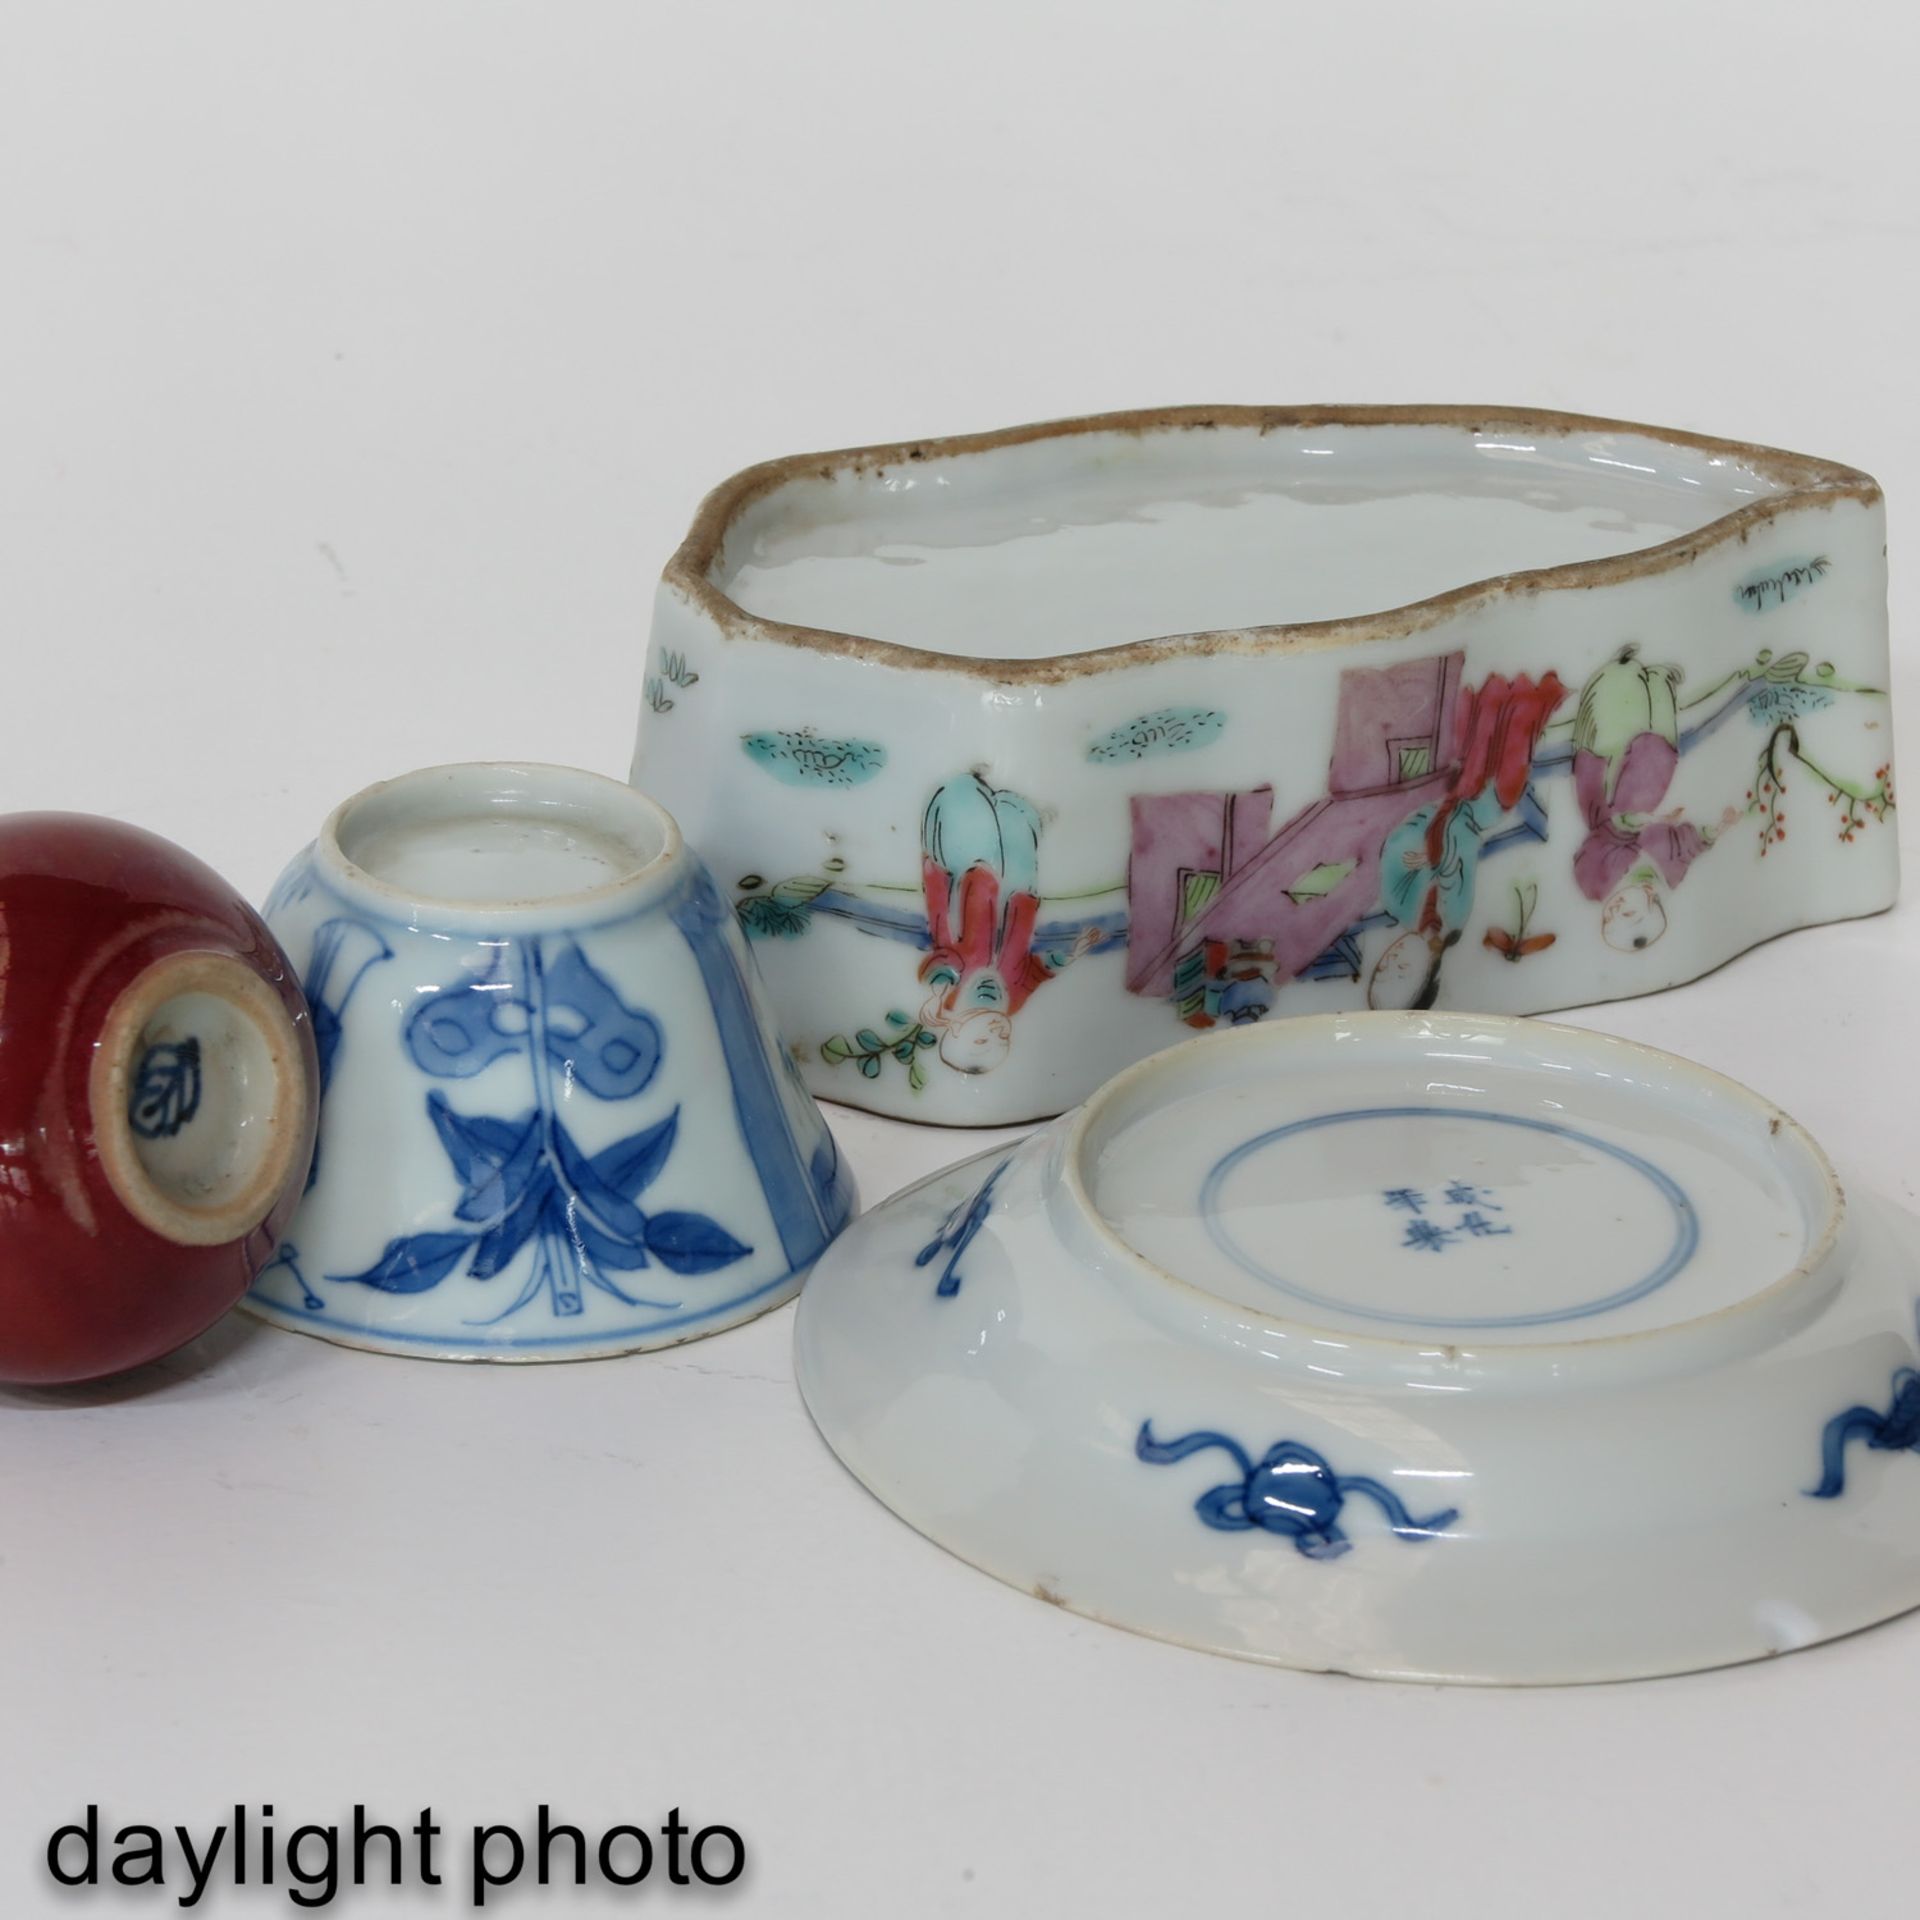 A Diverse Collection of Porcelain - Image 8 of 10